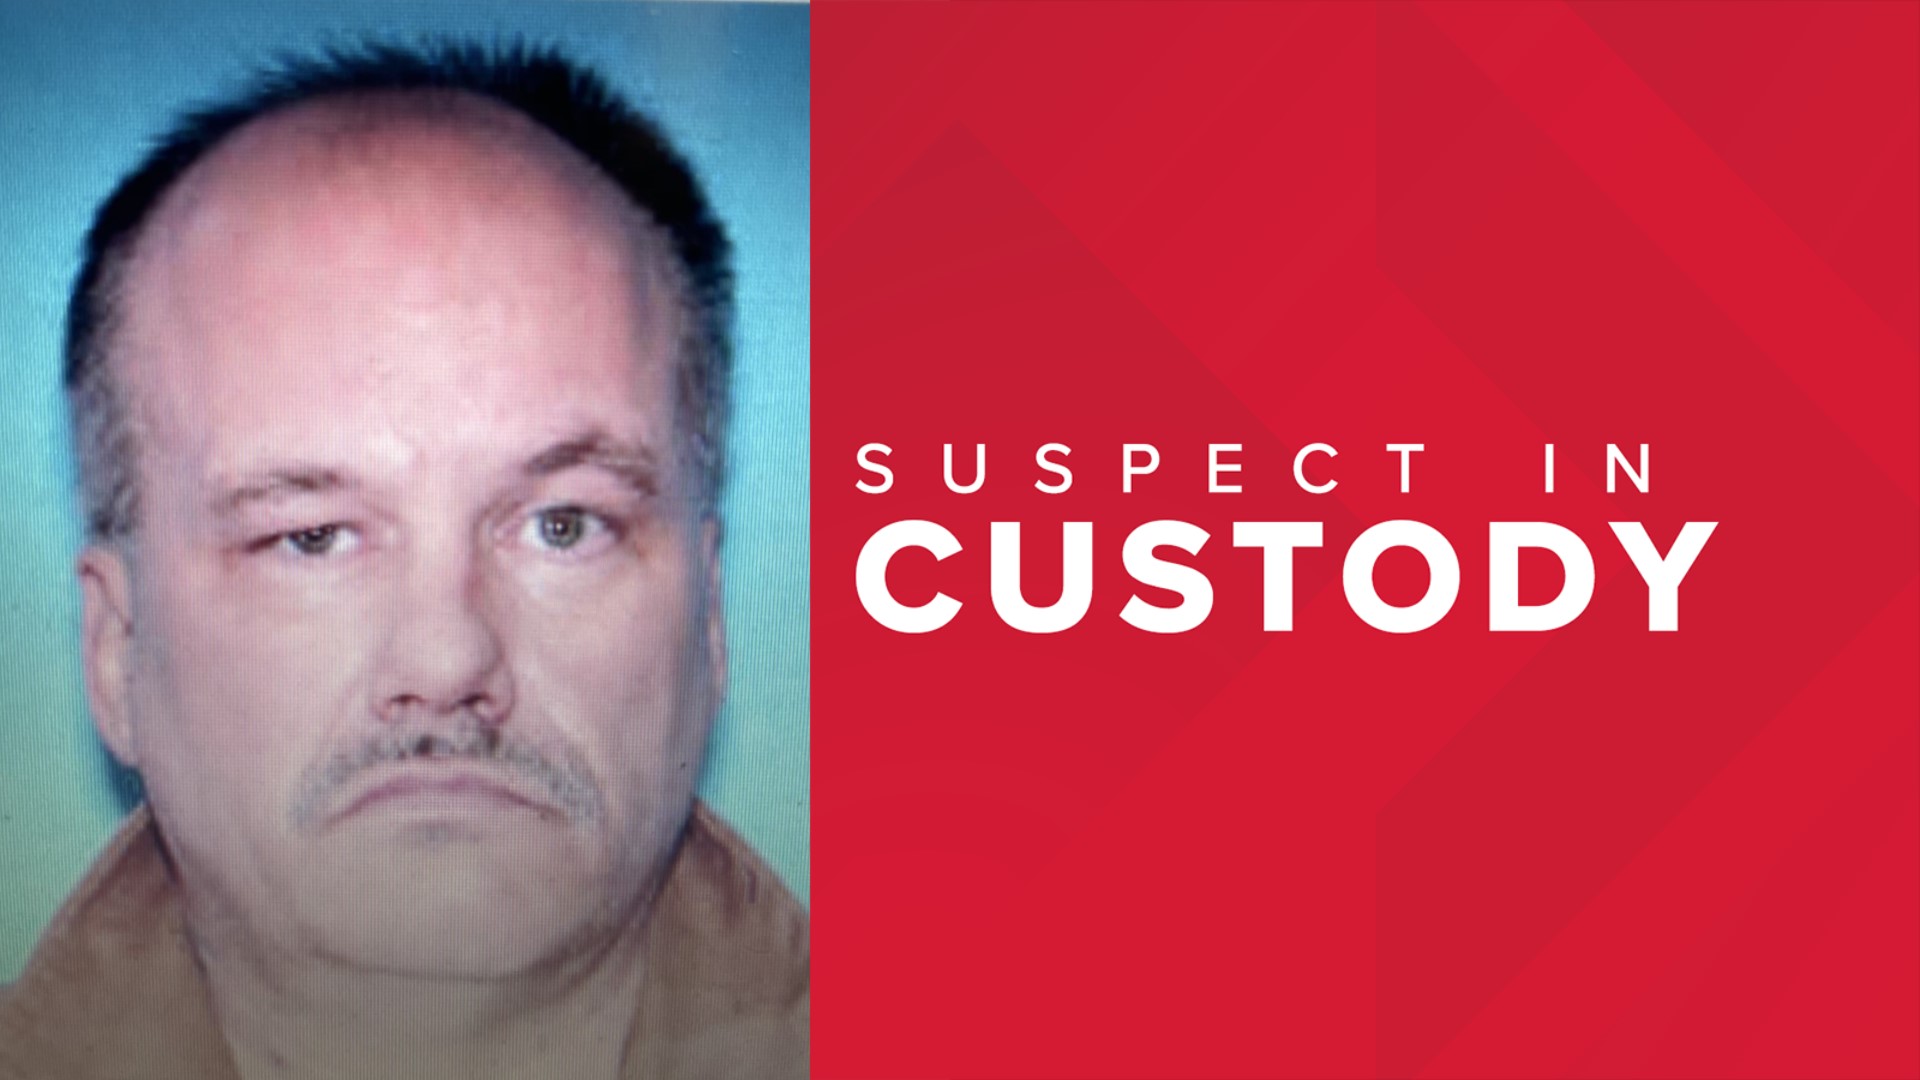 Harold Raymond Labeau, 51, was shot by a Mason County officer on Friday and taken into custody. He has been transported to a local area hospital.